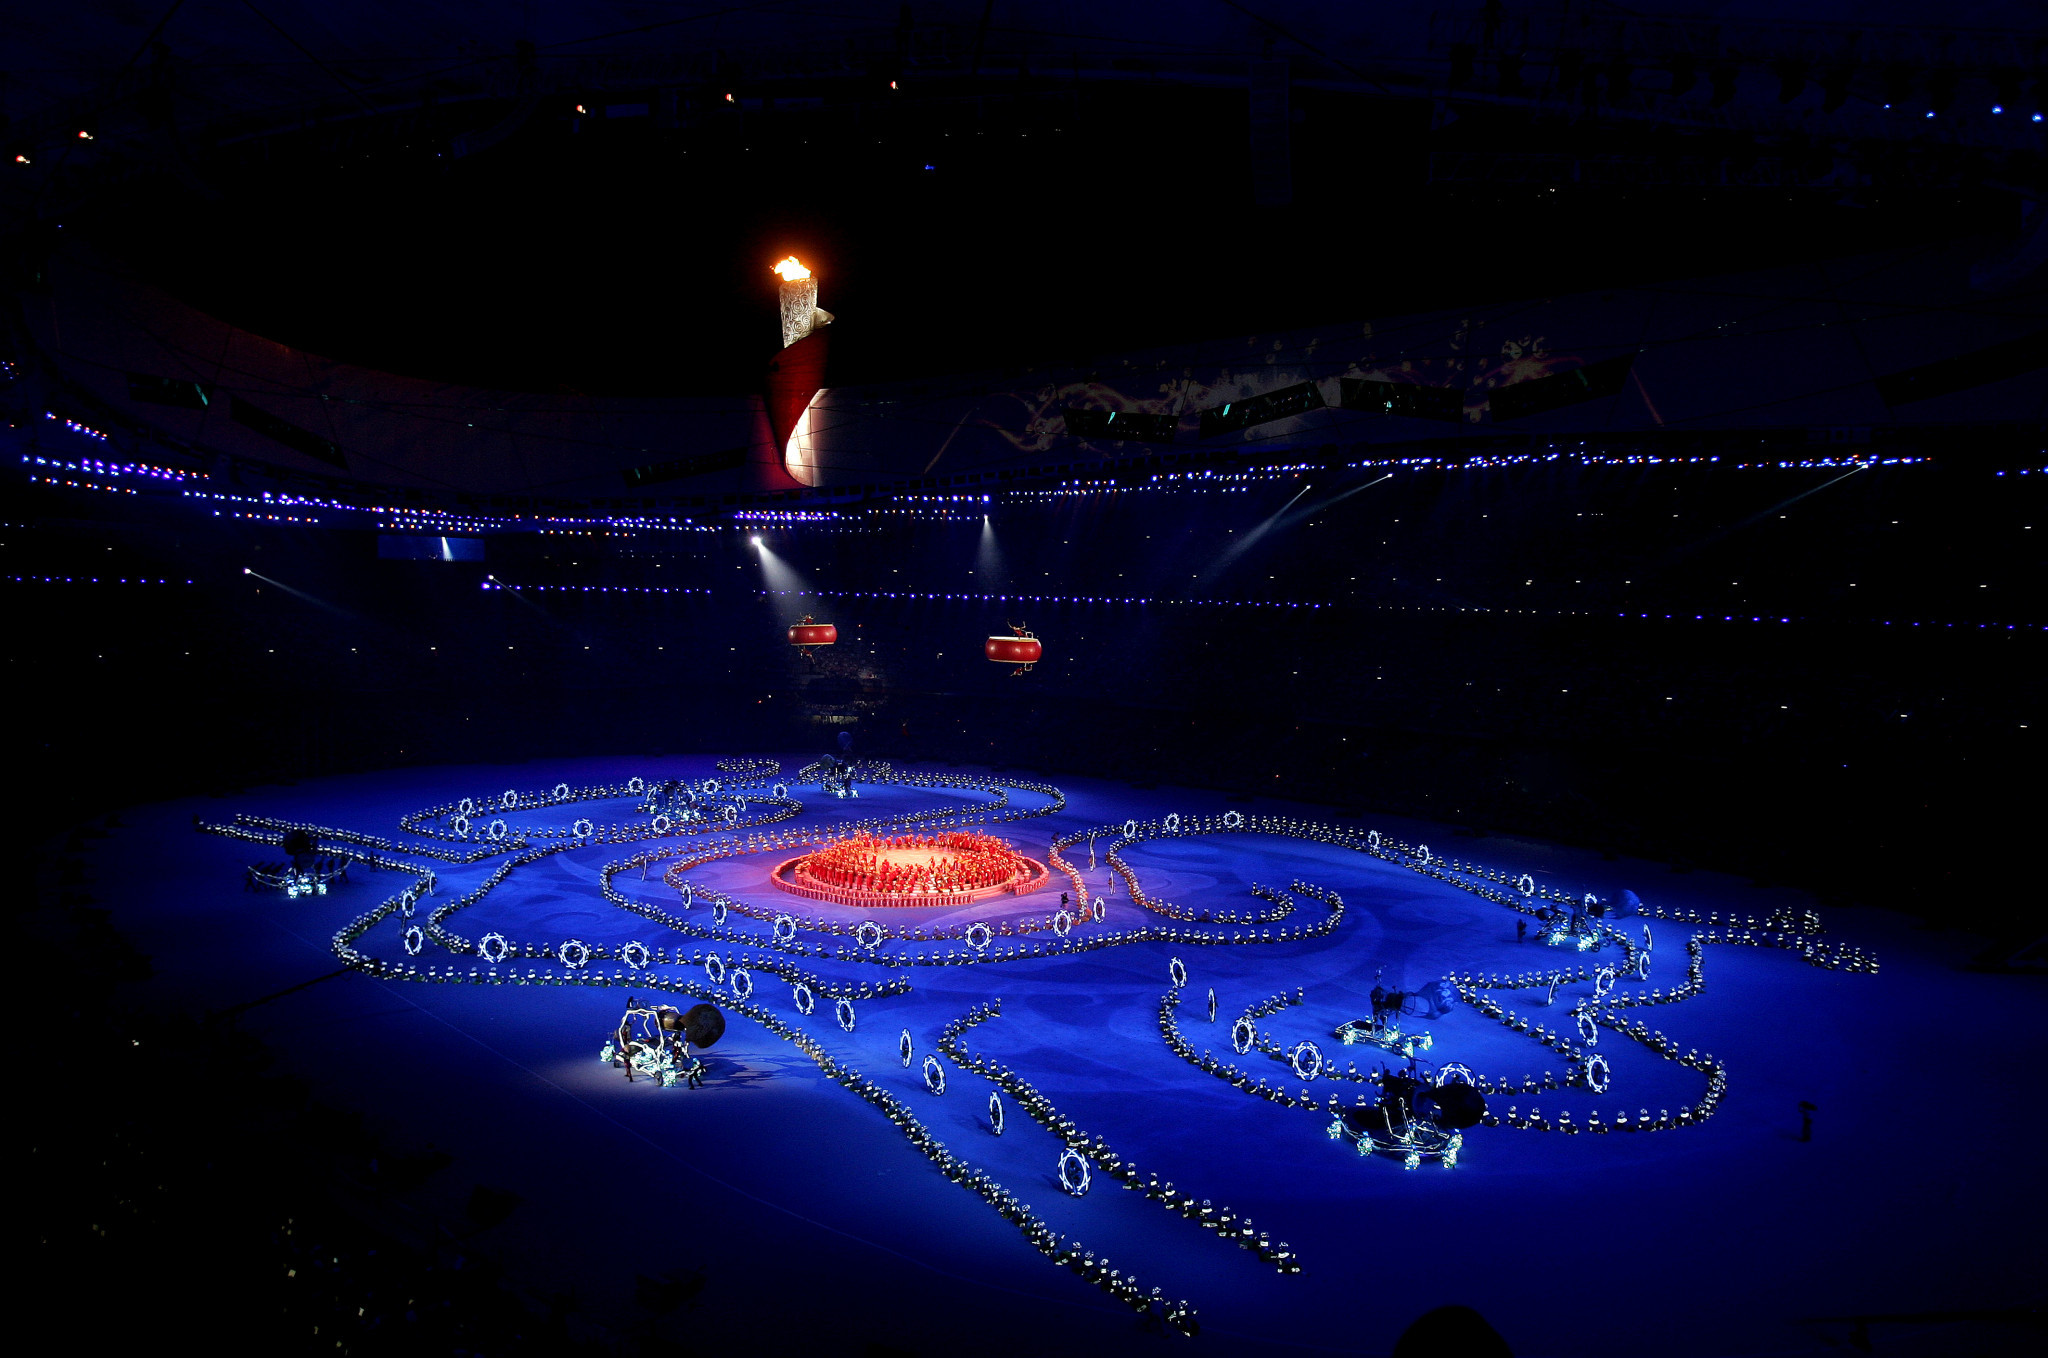 Beijing 2022 Closing Ceremony details closely guarded secret, but expected to be spectacular 